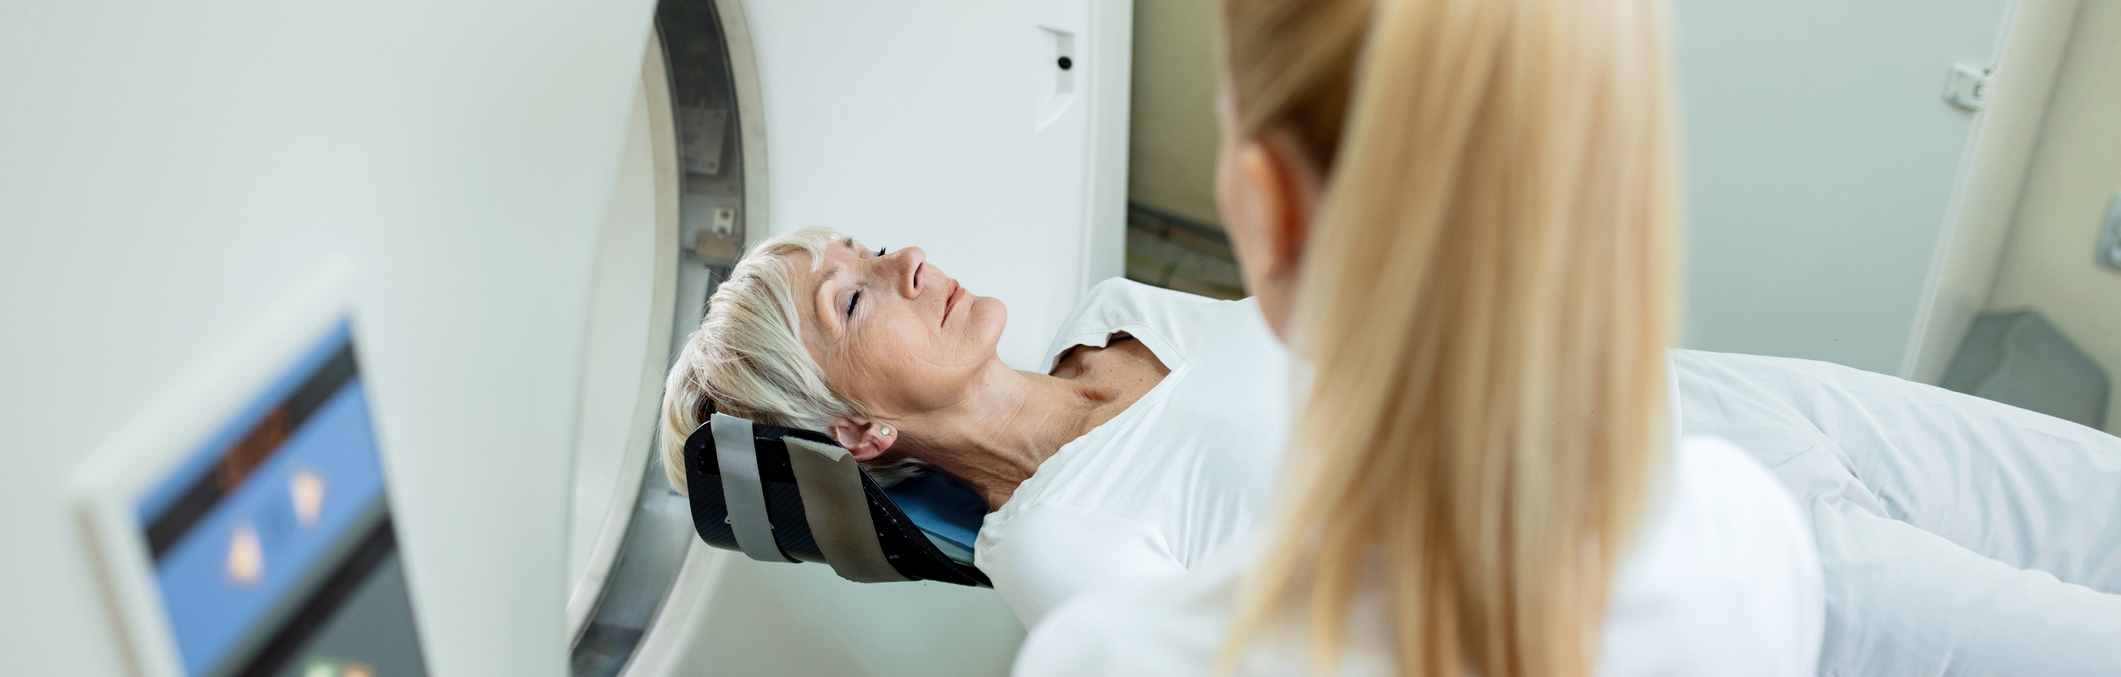 Technician overseeing CT scan for older woman